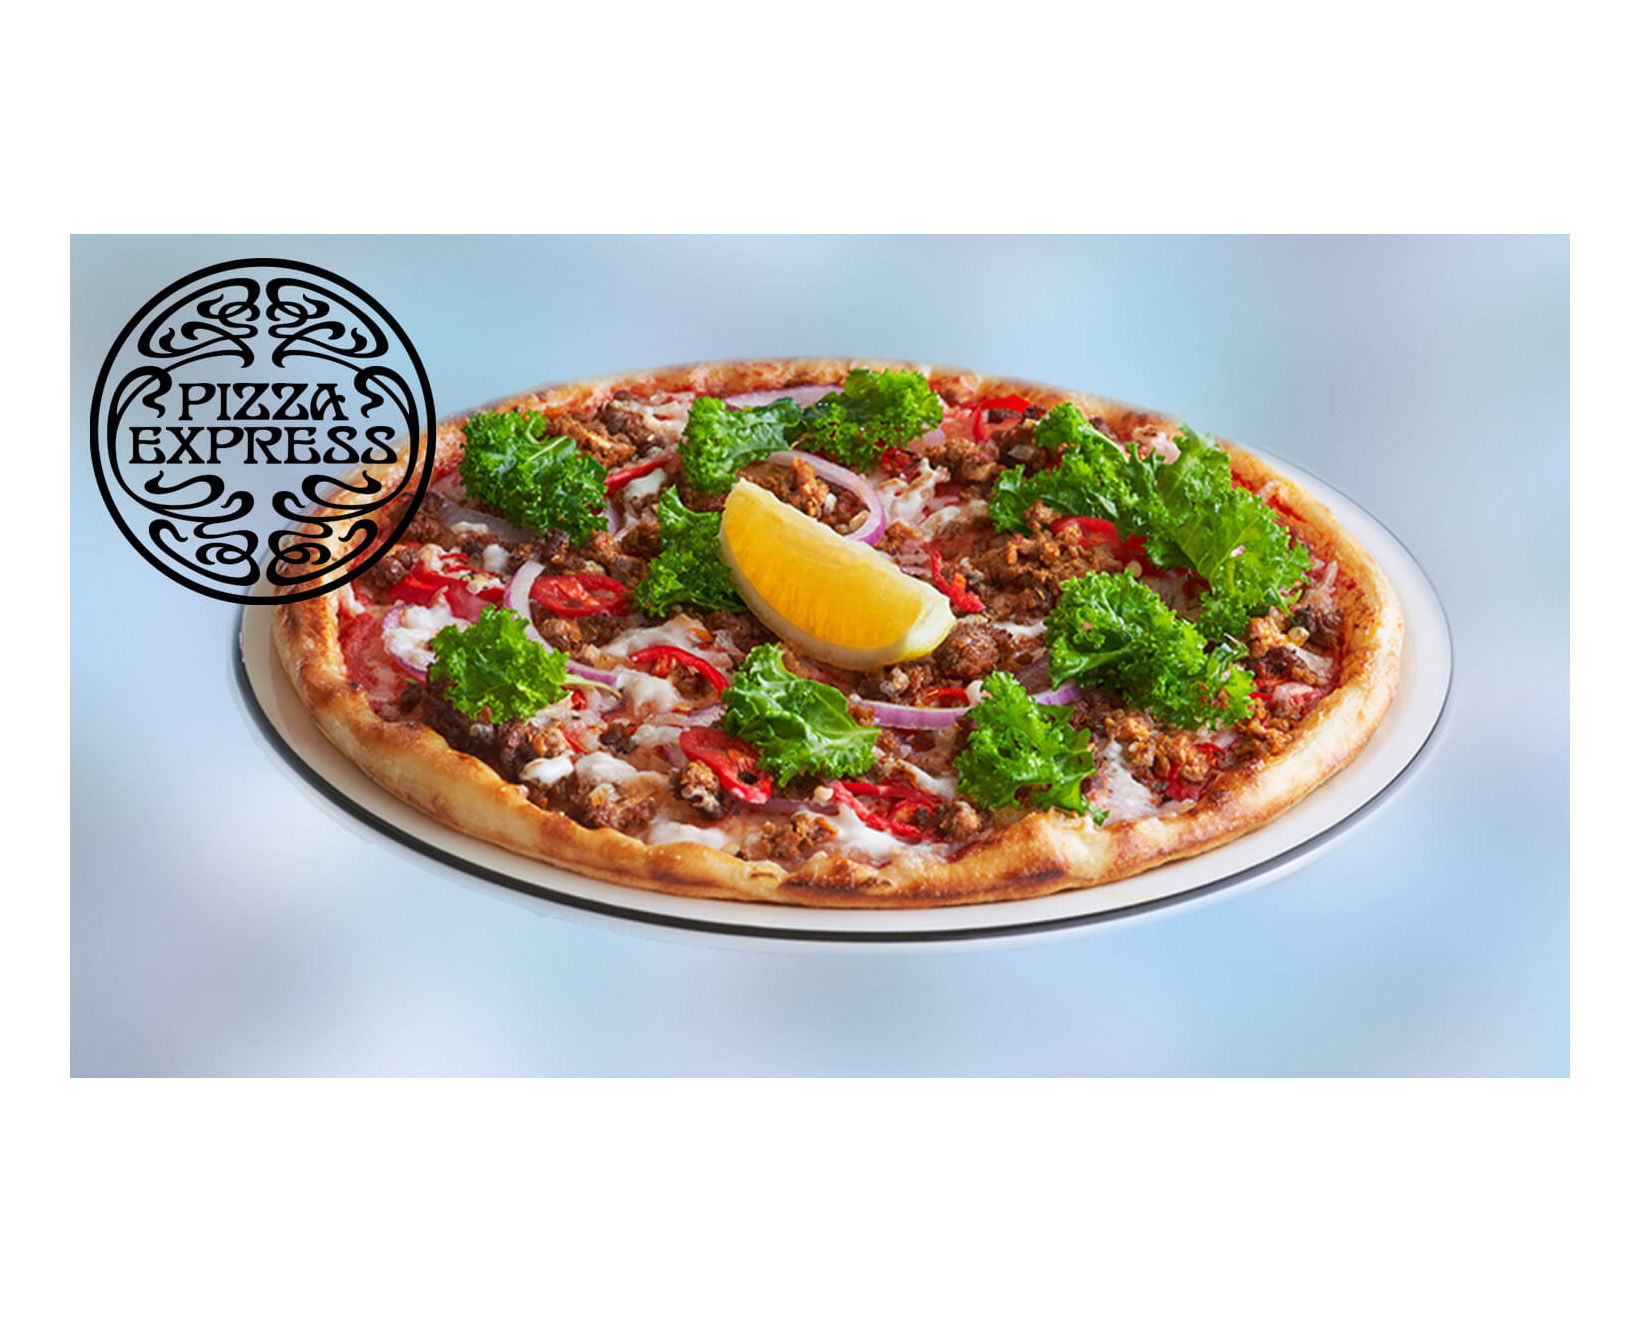 PIZZA EXPRESS LAUNCHES VEGAN CHEESE, BEEF, AND PORK